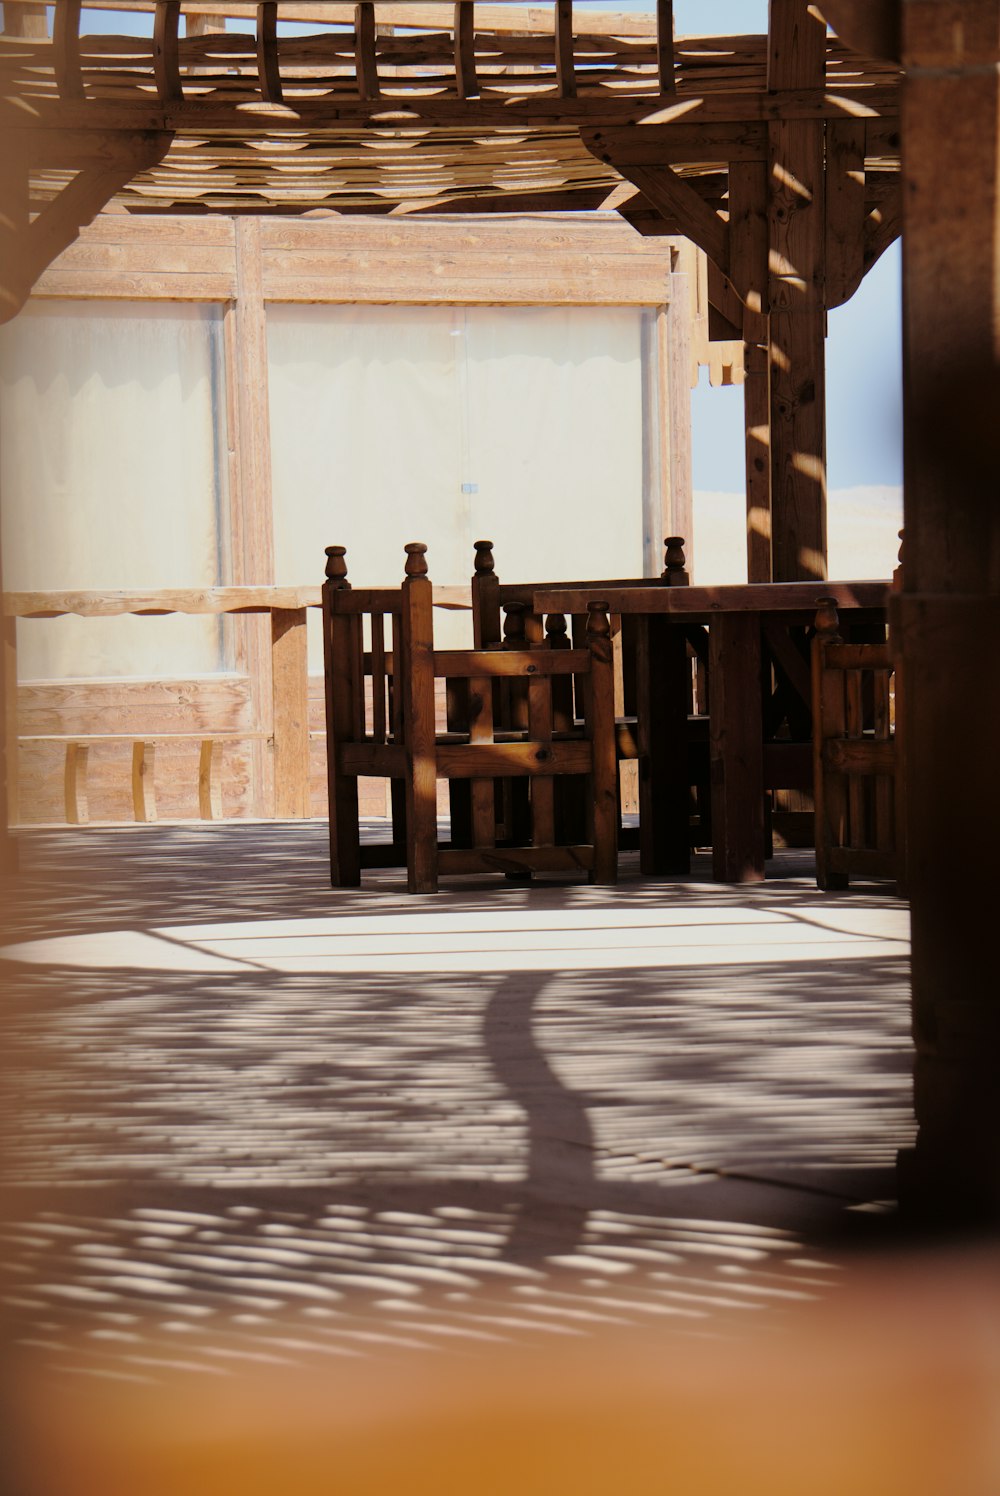 the shadow of a person standing in front of a wooden structure